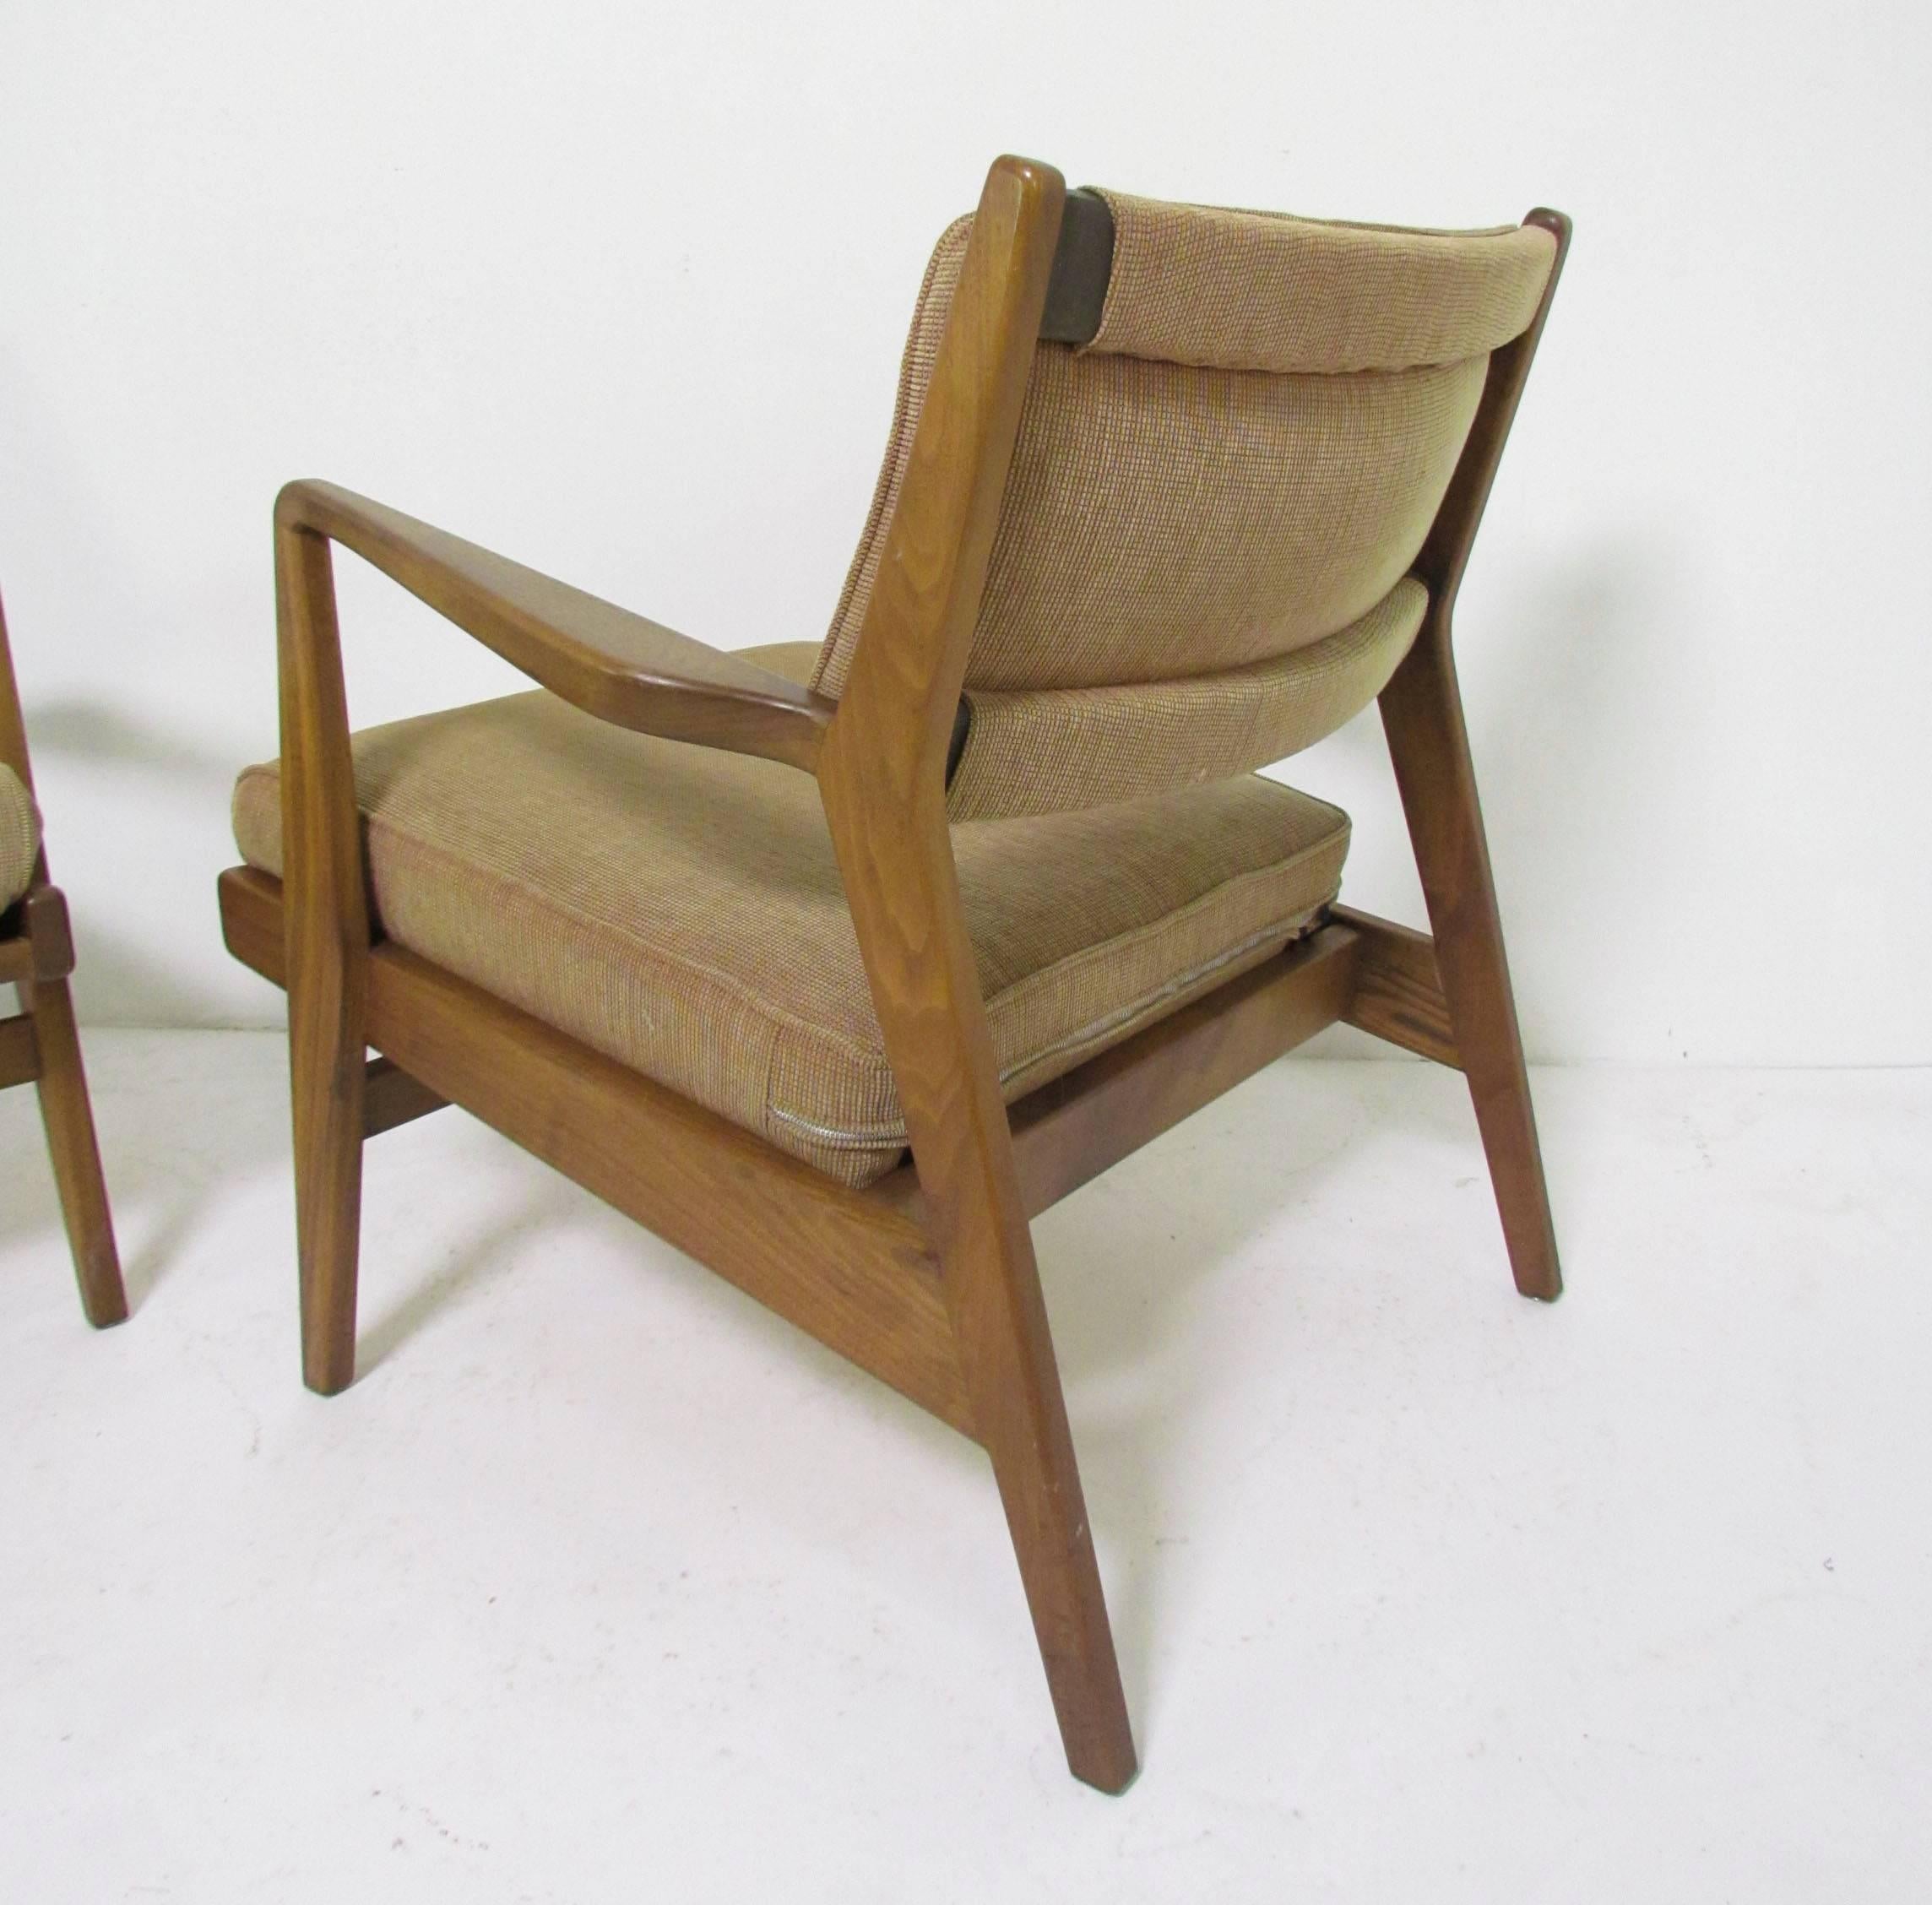 American Pair of Mid-Century Lounge Chairs by Jens Risom